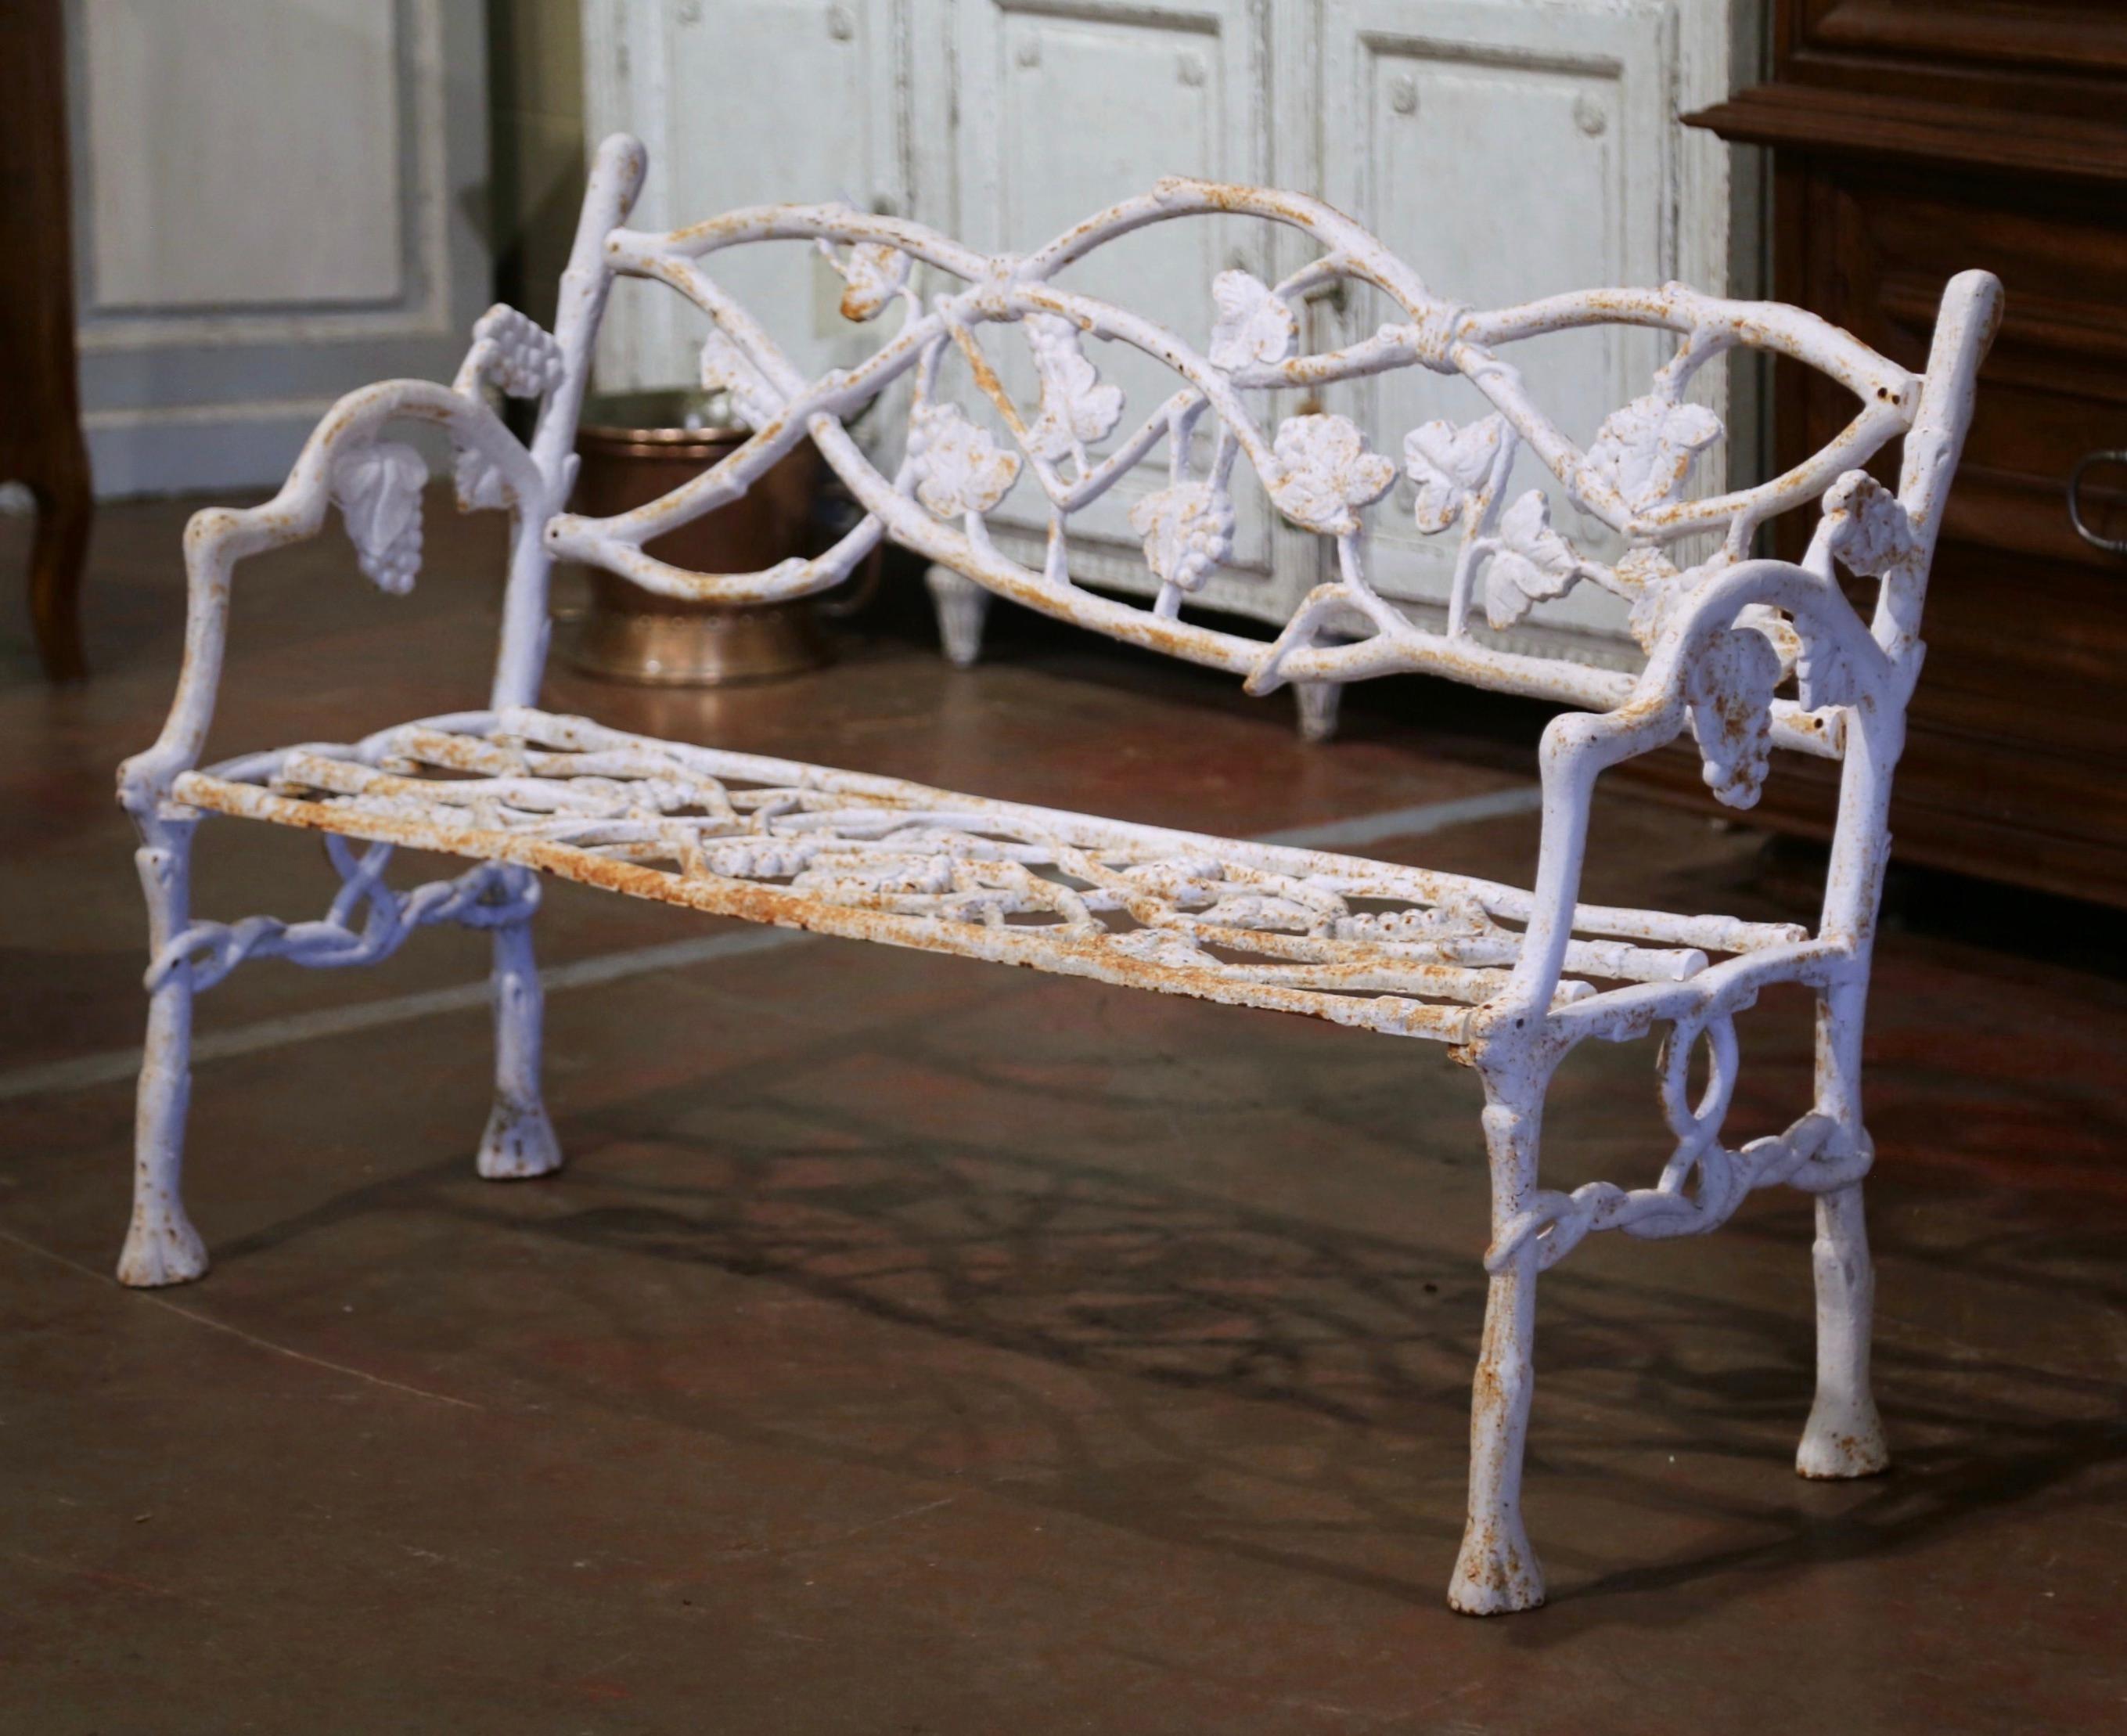 Create extra seating on your patio or in your backyard with this iron bench. Crafted in Normandy France circa 1920, the antique bench stands on carved scrolled painted iron support legs shaped like intertwined tree branches. The back and seat,